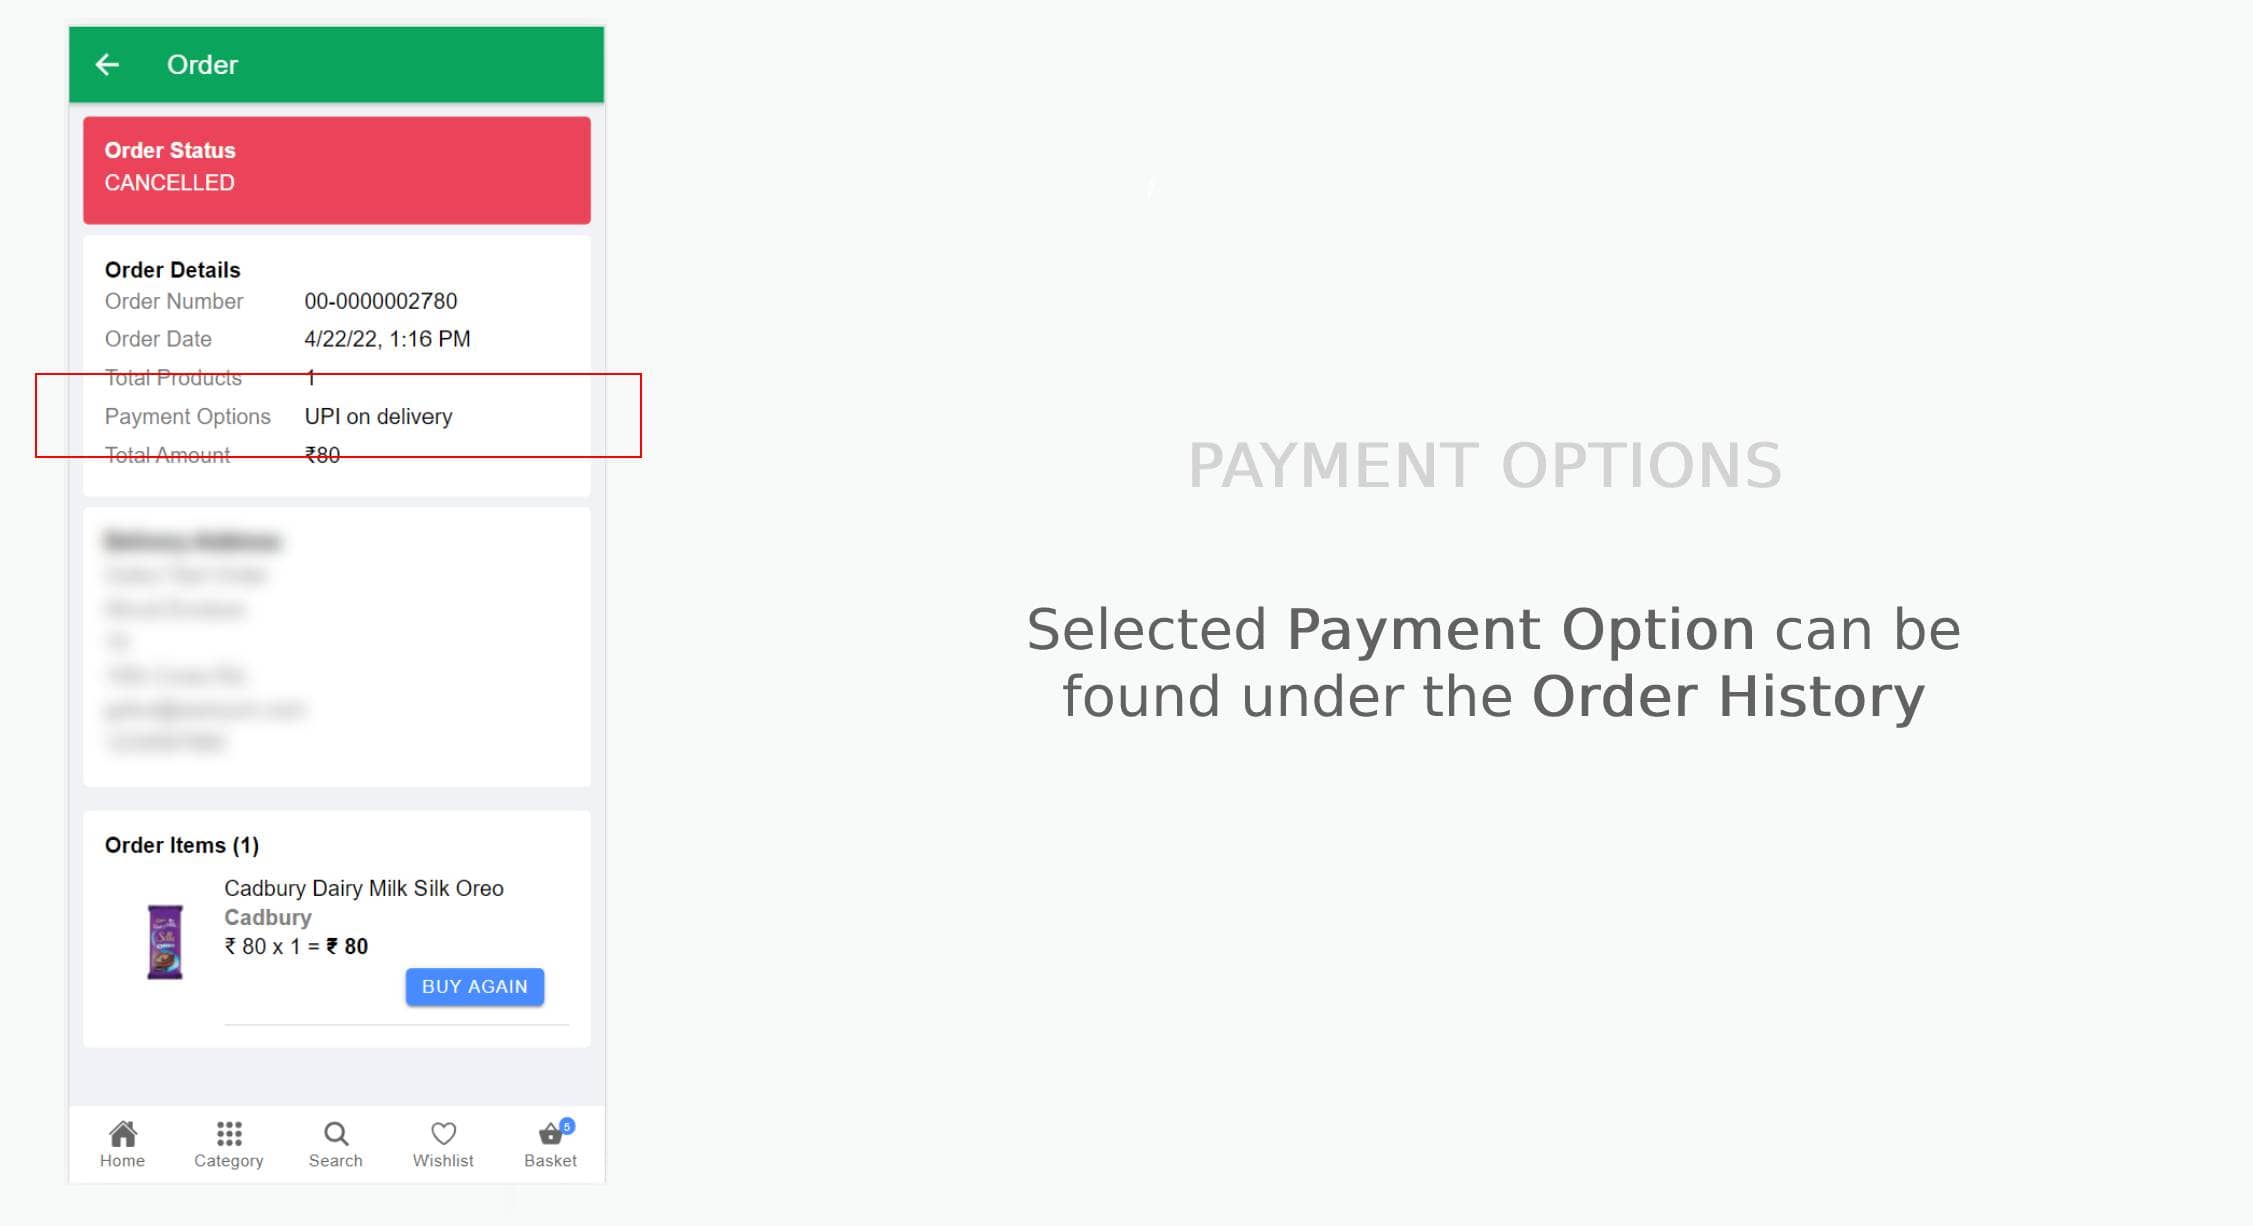 Payment Options on Order History